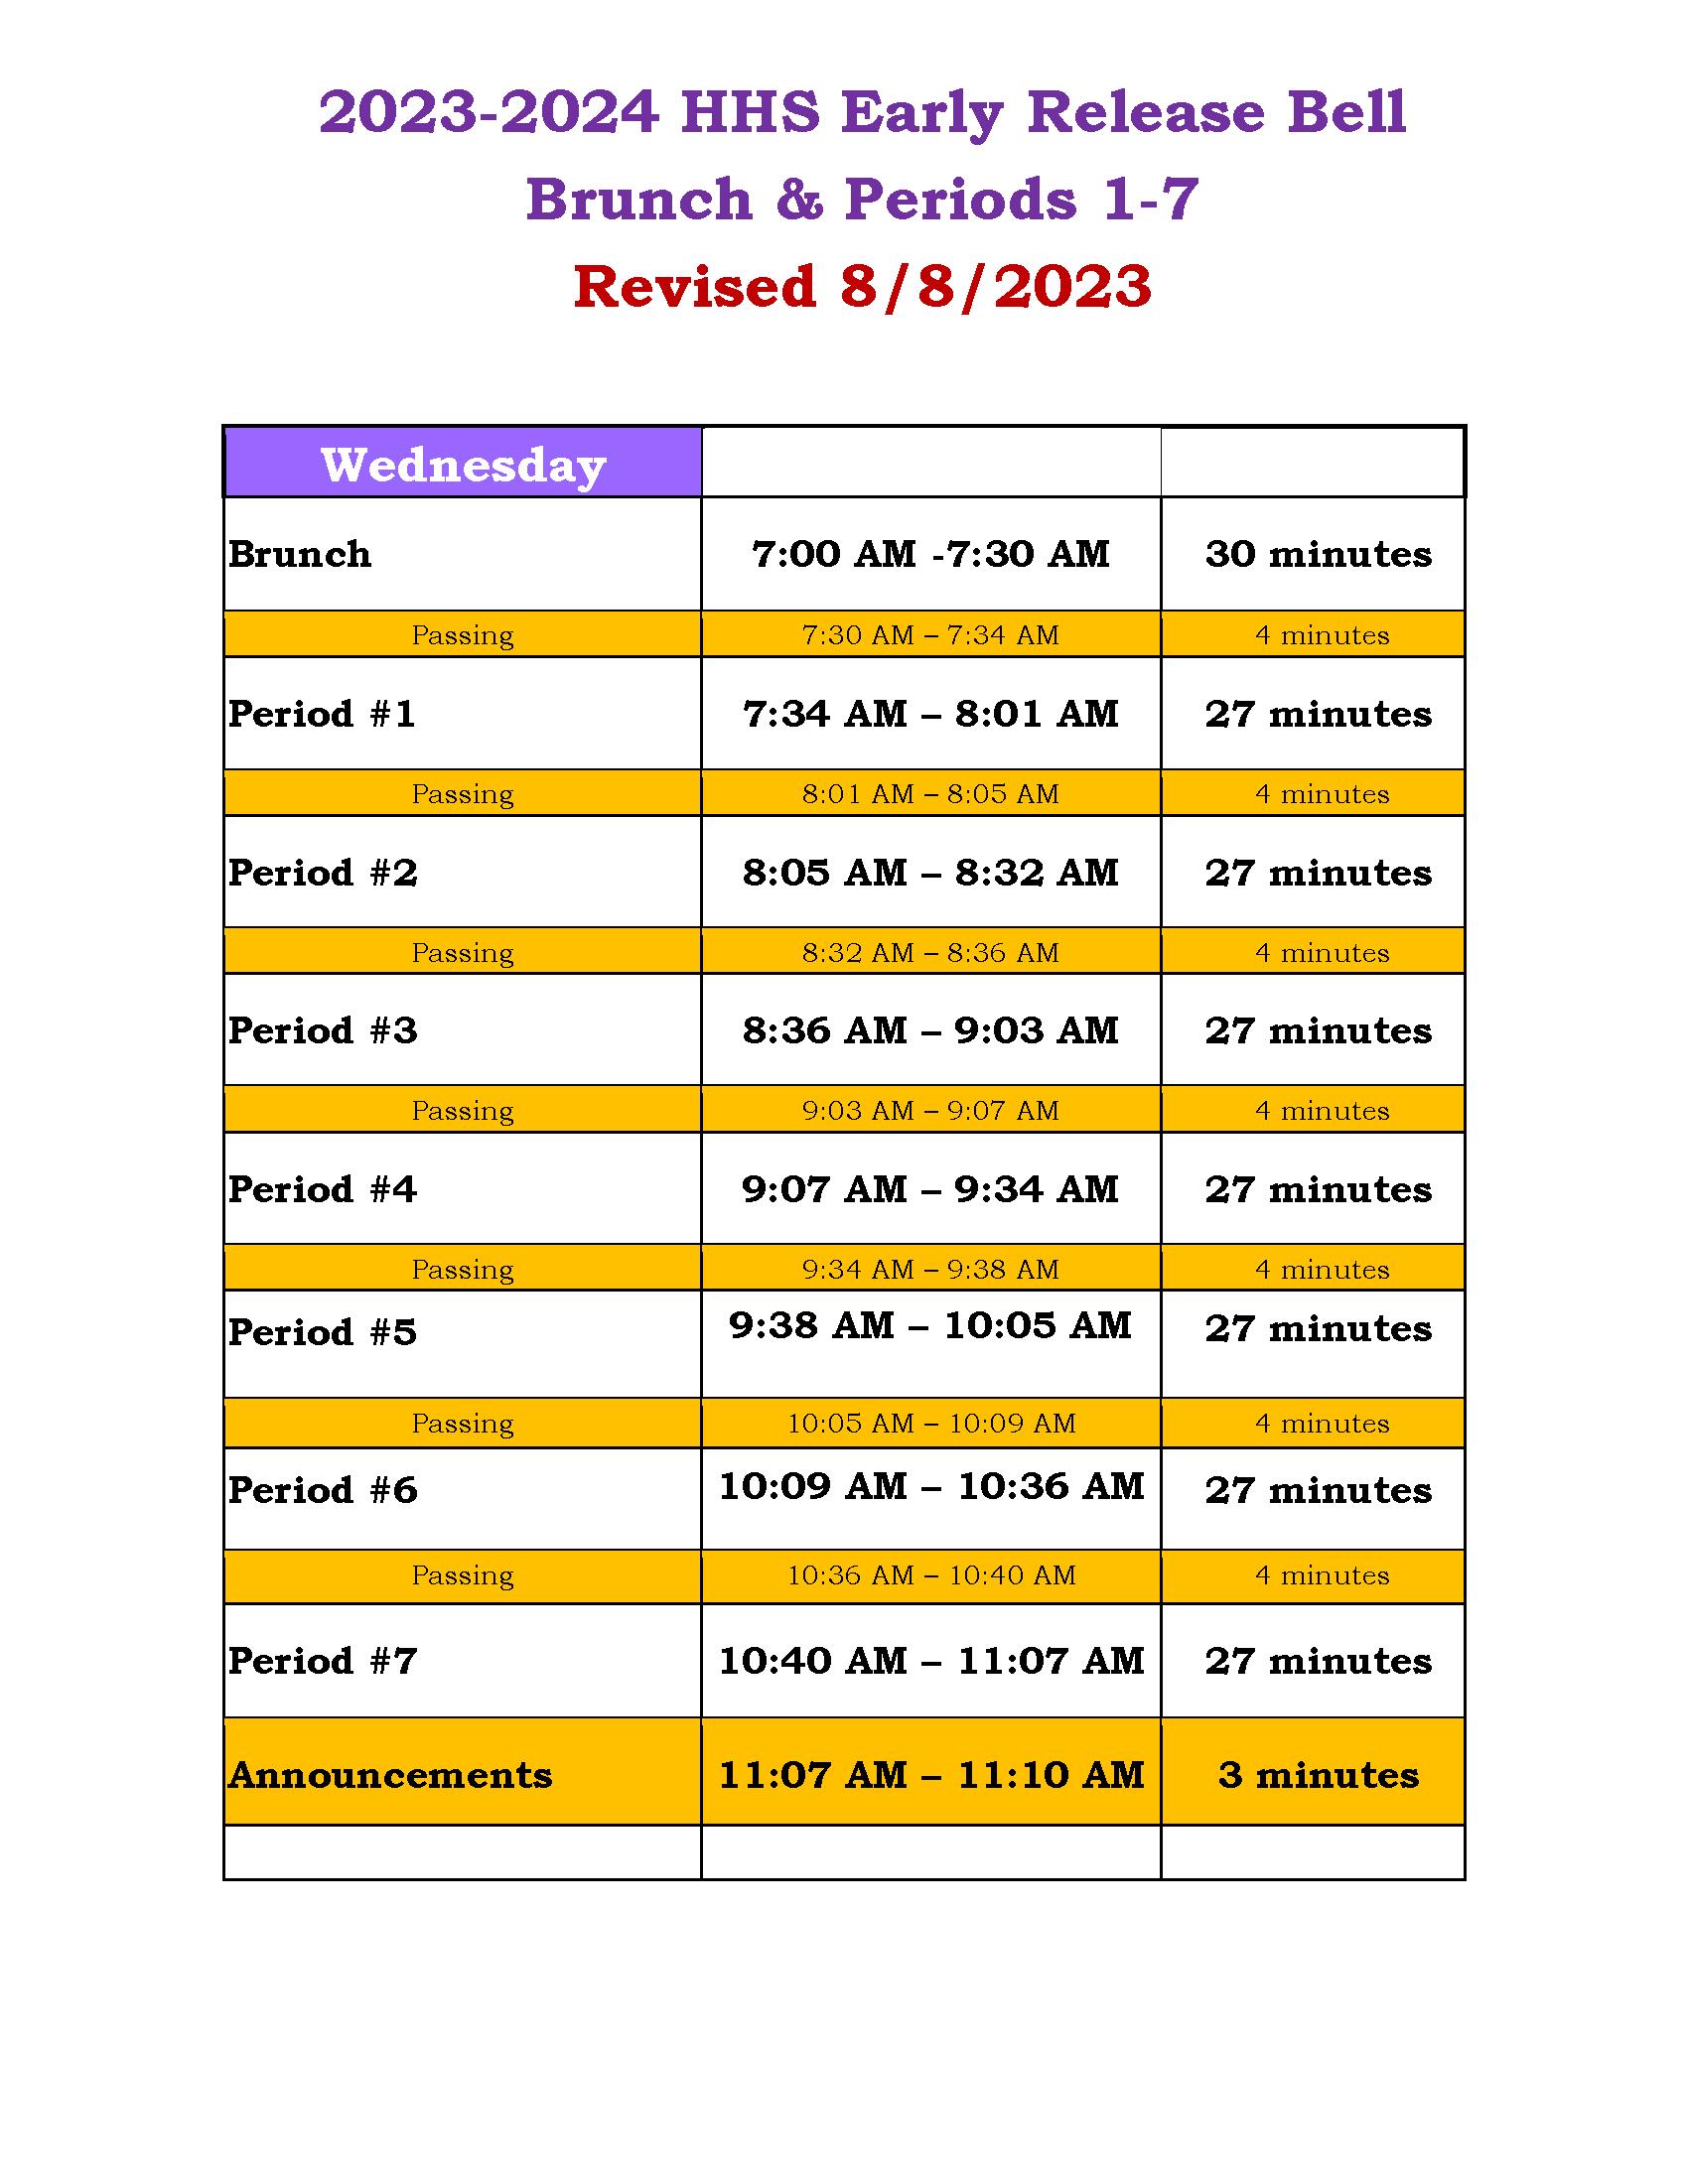 HHS Early Release Schedule